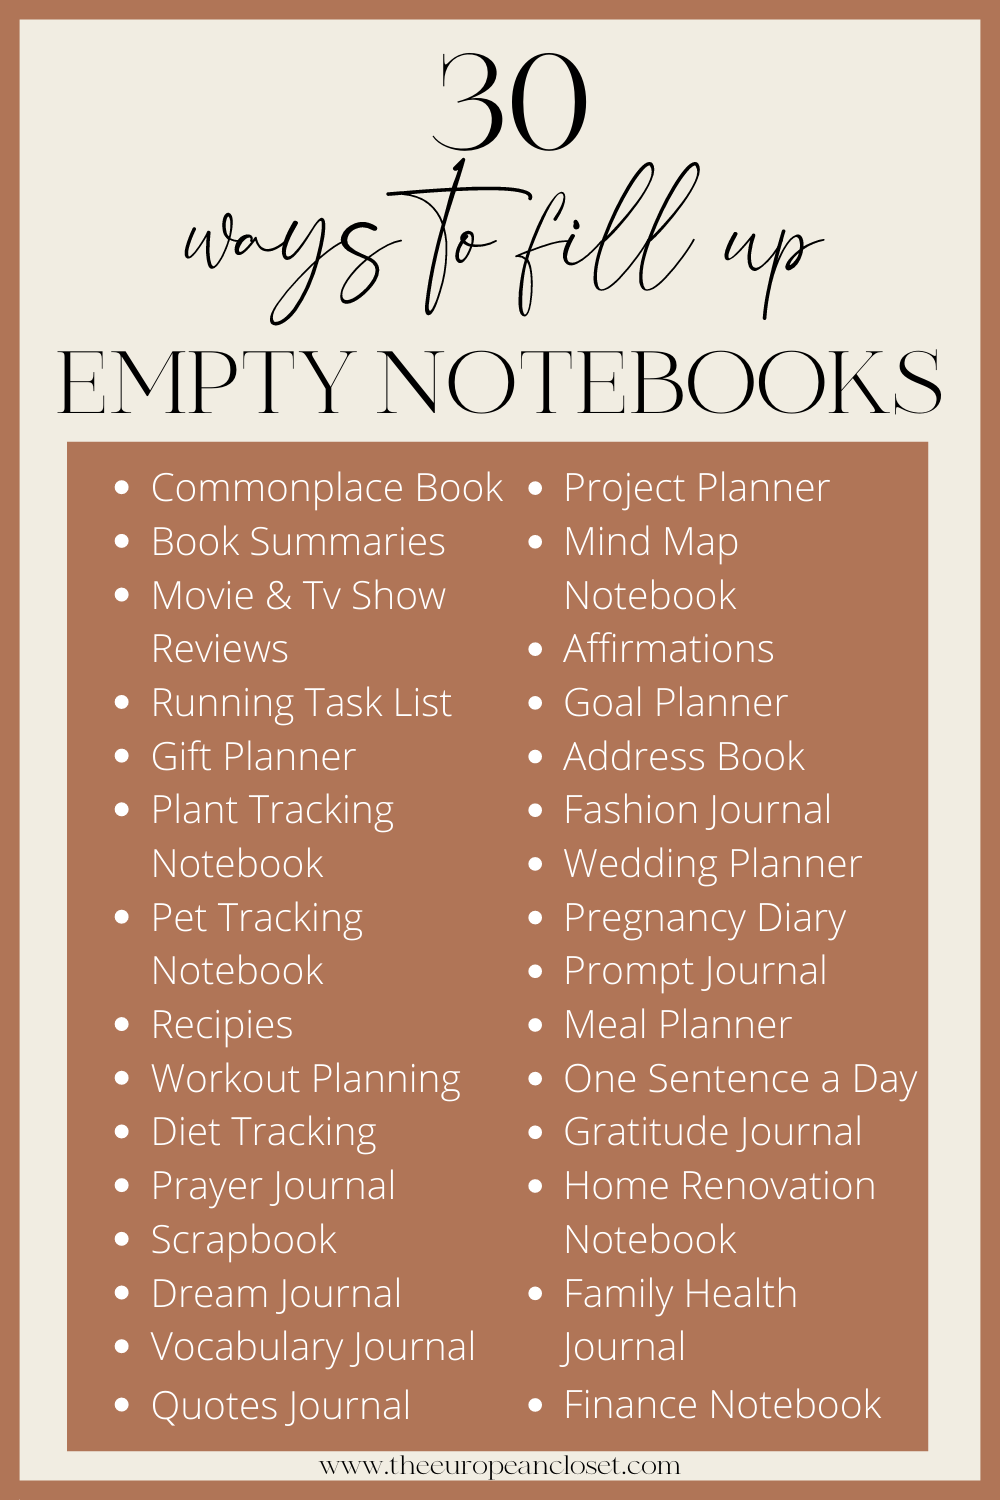 Looking for new ways to fill up your empty notebooks? Look no further. Here are 30 fun ways you can fill up your journals today!